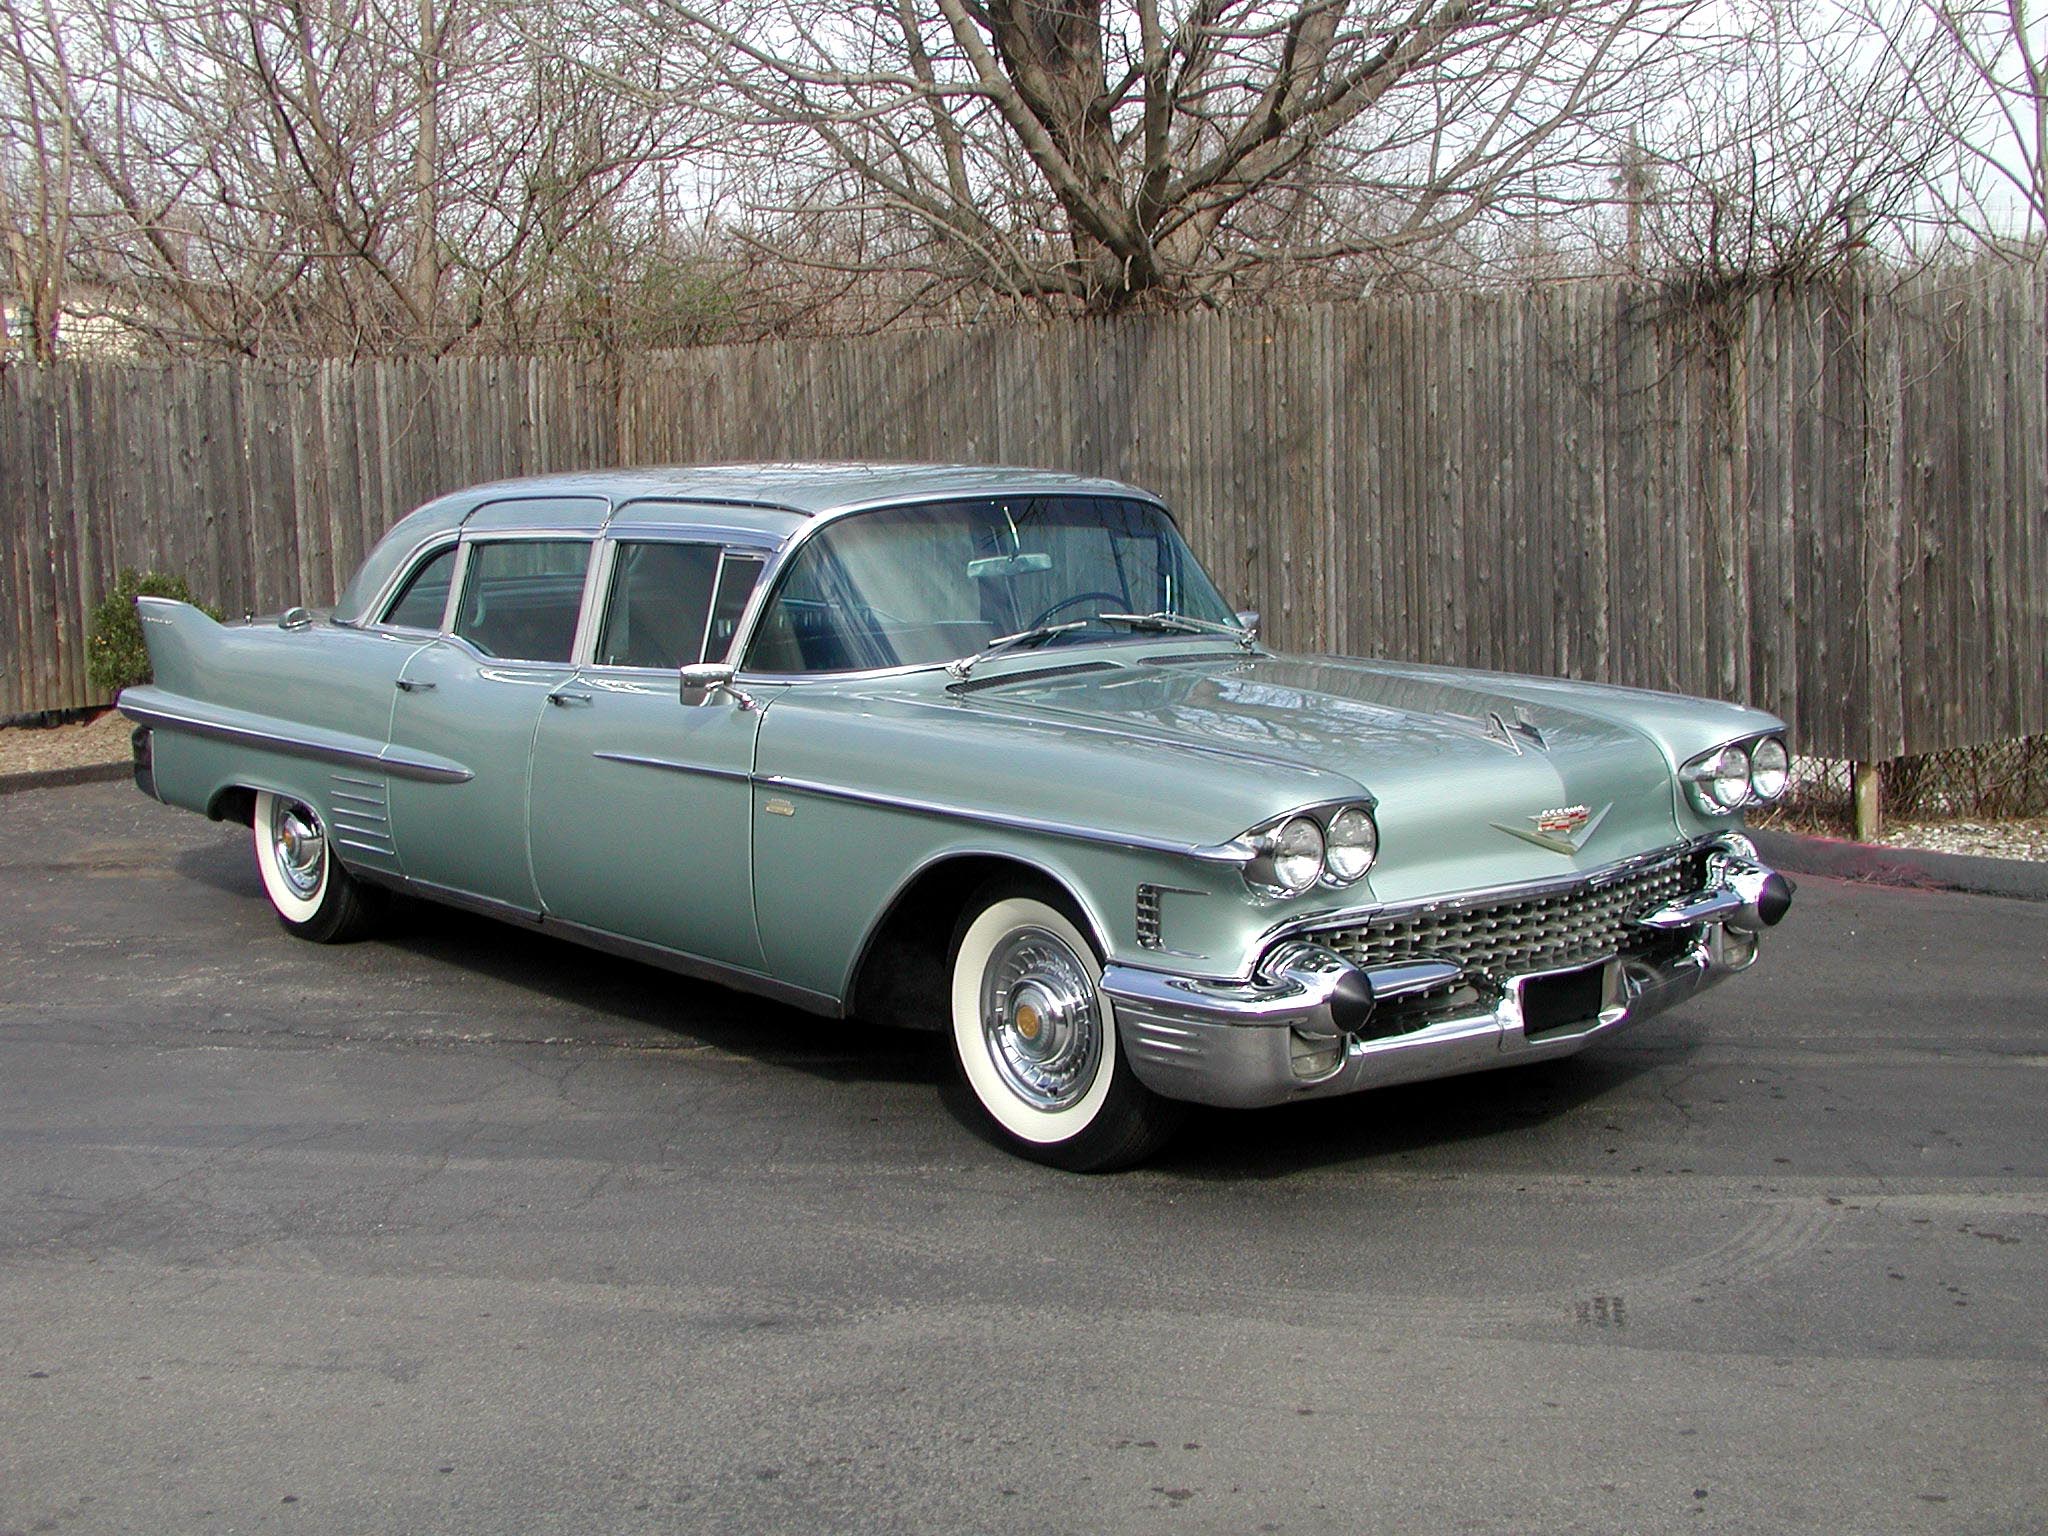 1957 cadillac fleetwood series 75 imperial